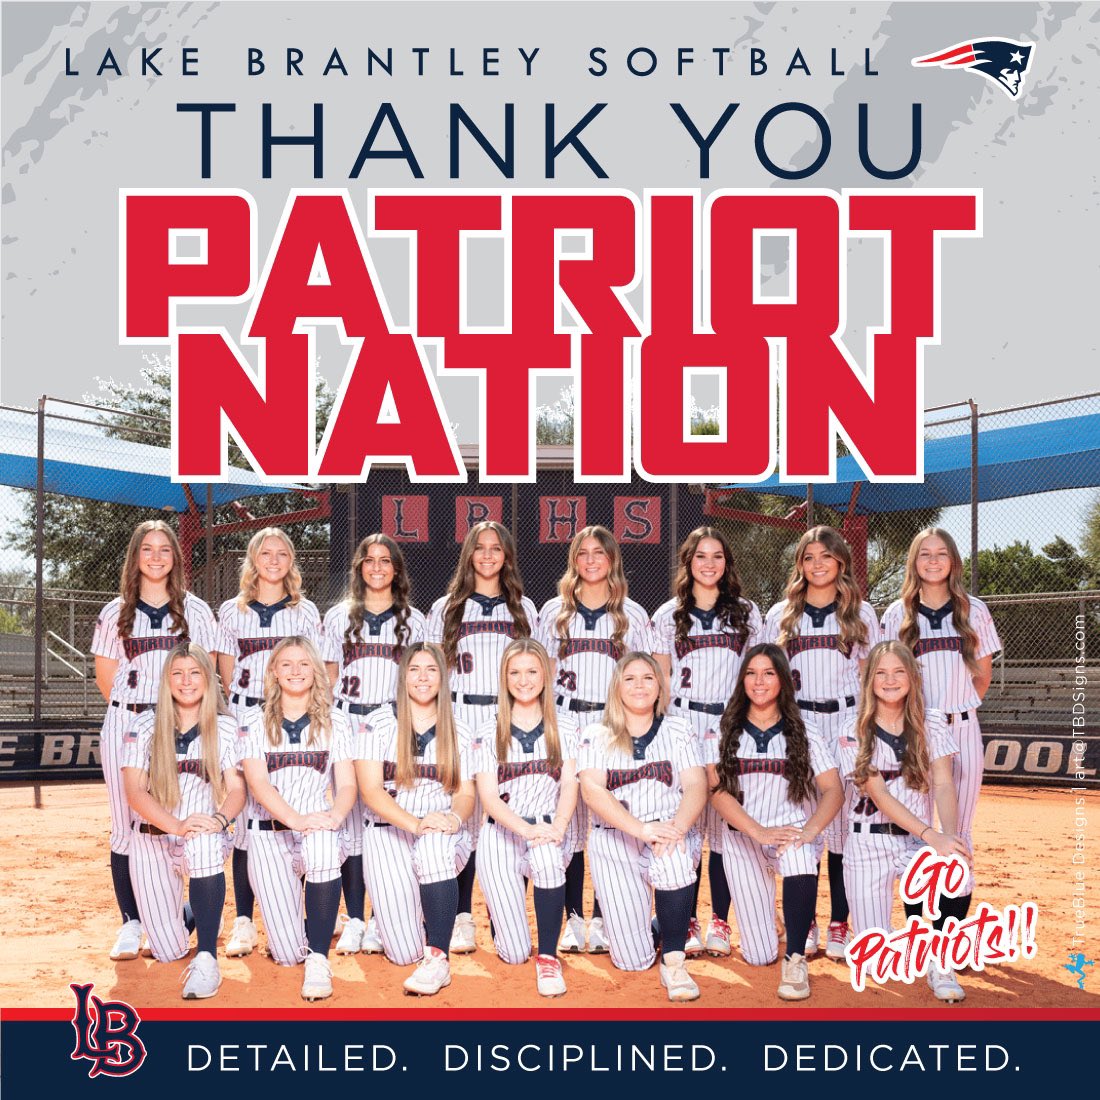 The 2024 season was one to be remembered. We are so grateful for the support this community gave us on a nightly basis. We gave it everything we had every time we stepped on the clay! We will be back stronger than ever.

See you in 2025! #GoPatriots #WhateverItTakes